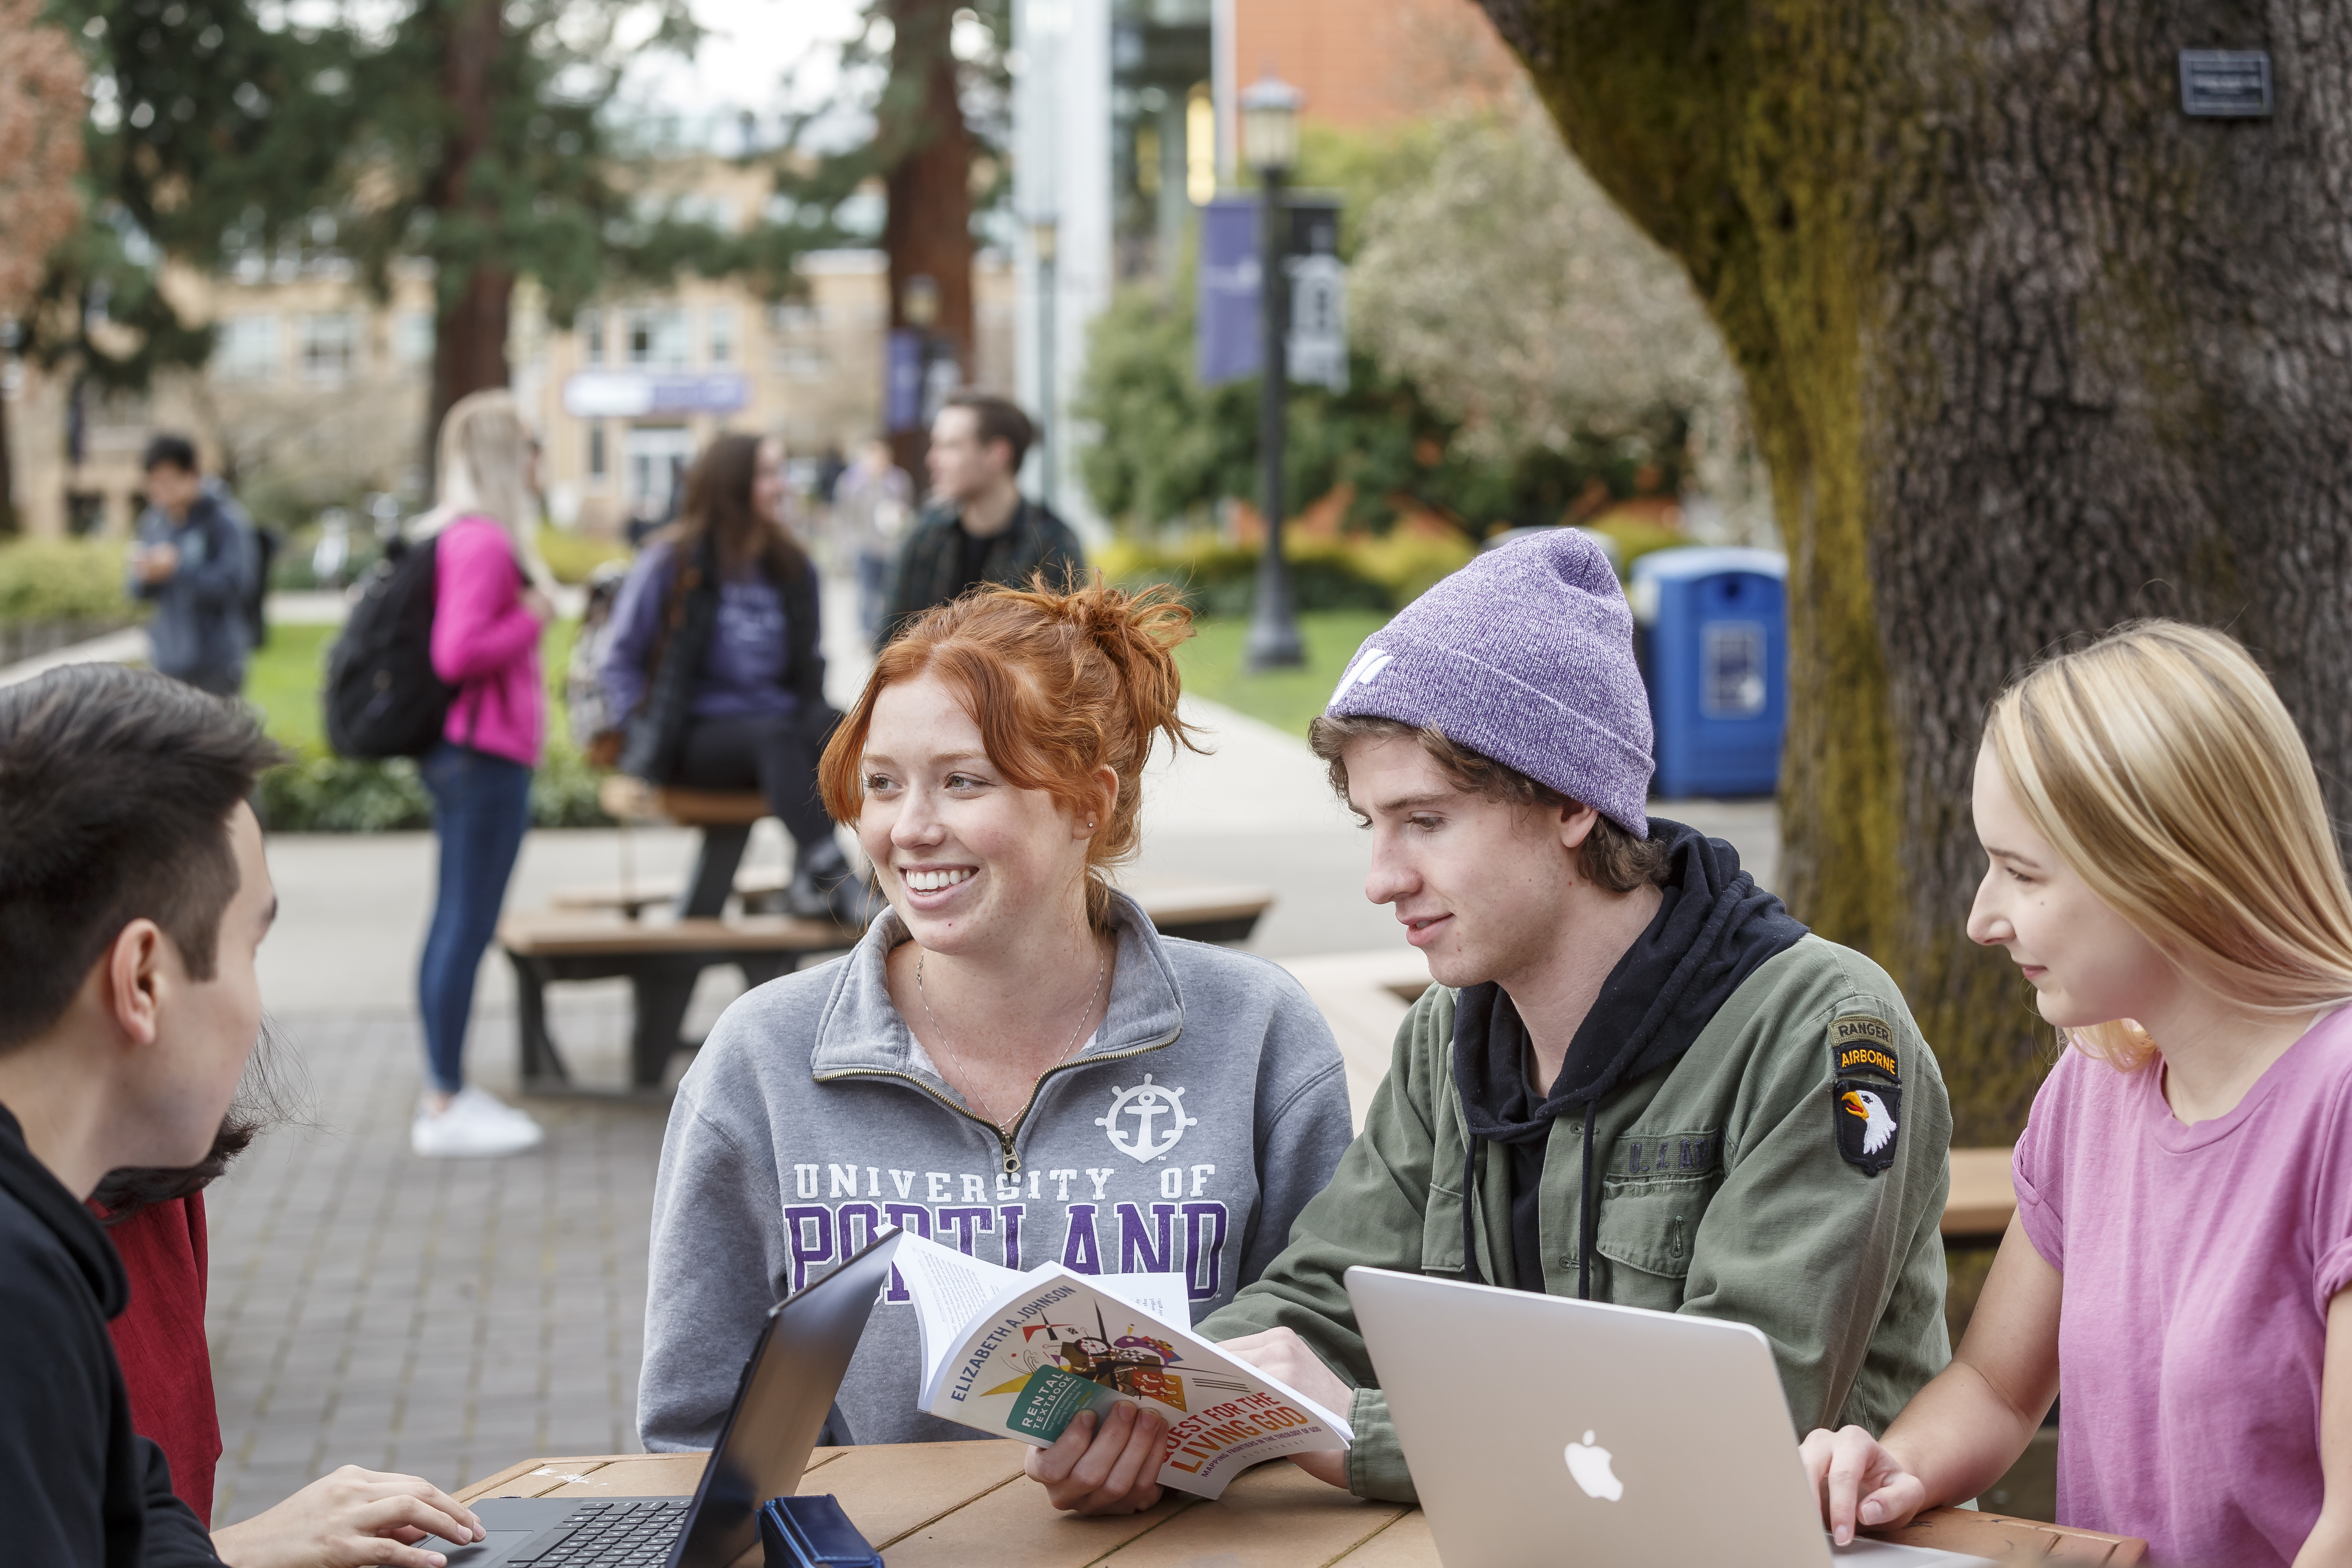 A group of students studying outside